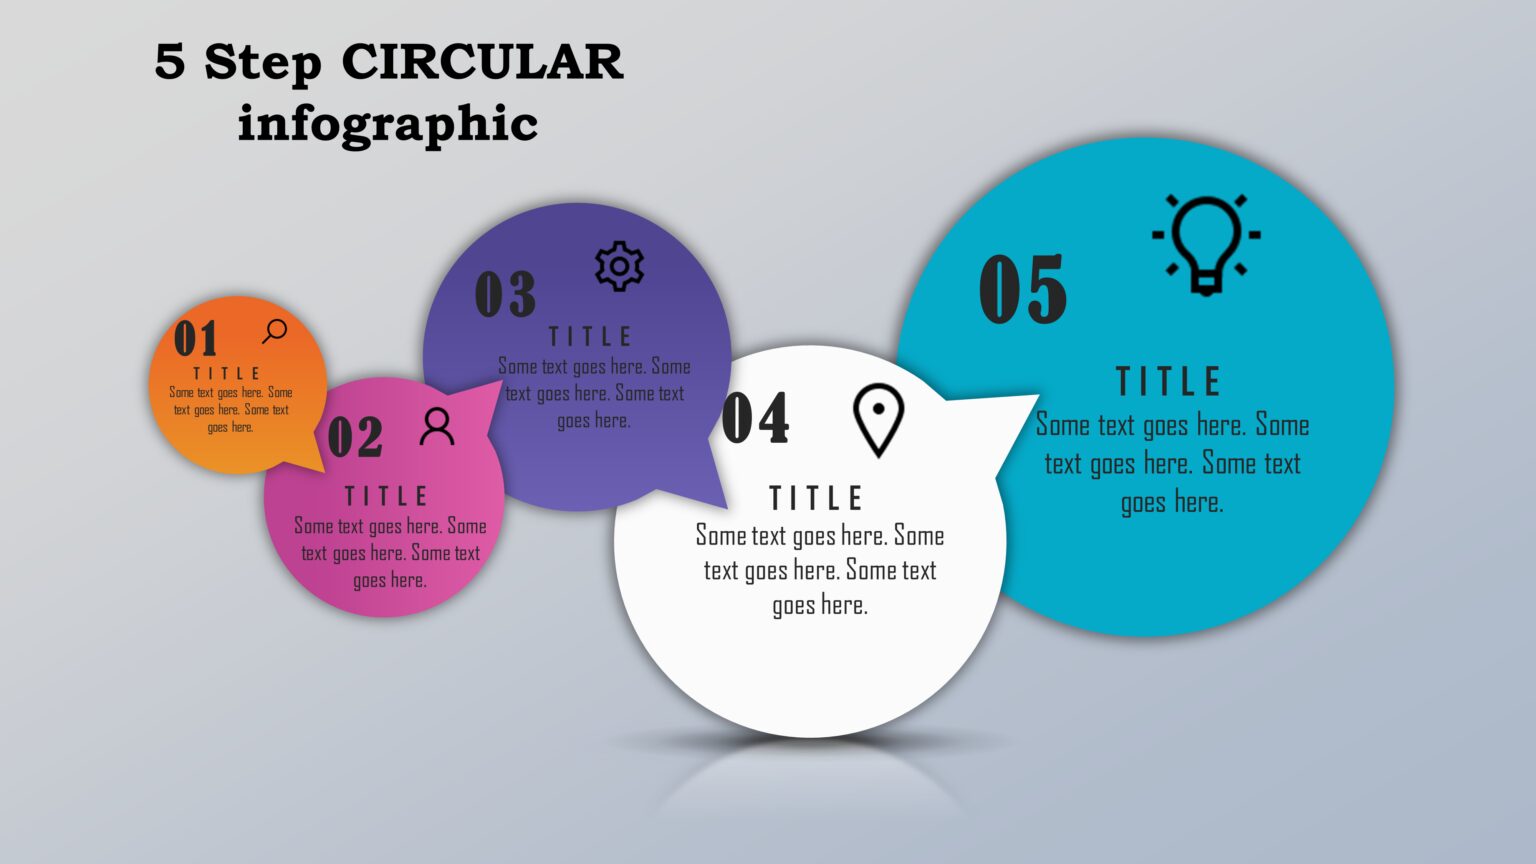 17powerpoint 5 Step Circular Infographic Powerup With Powerpoint 3053